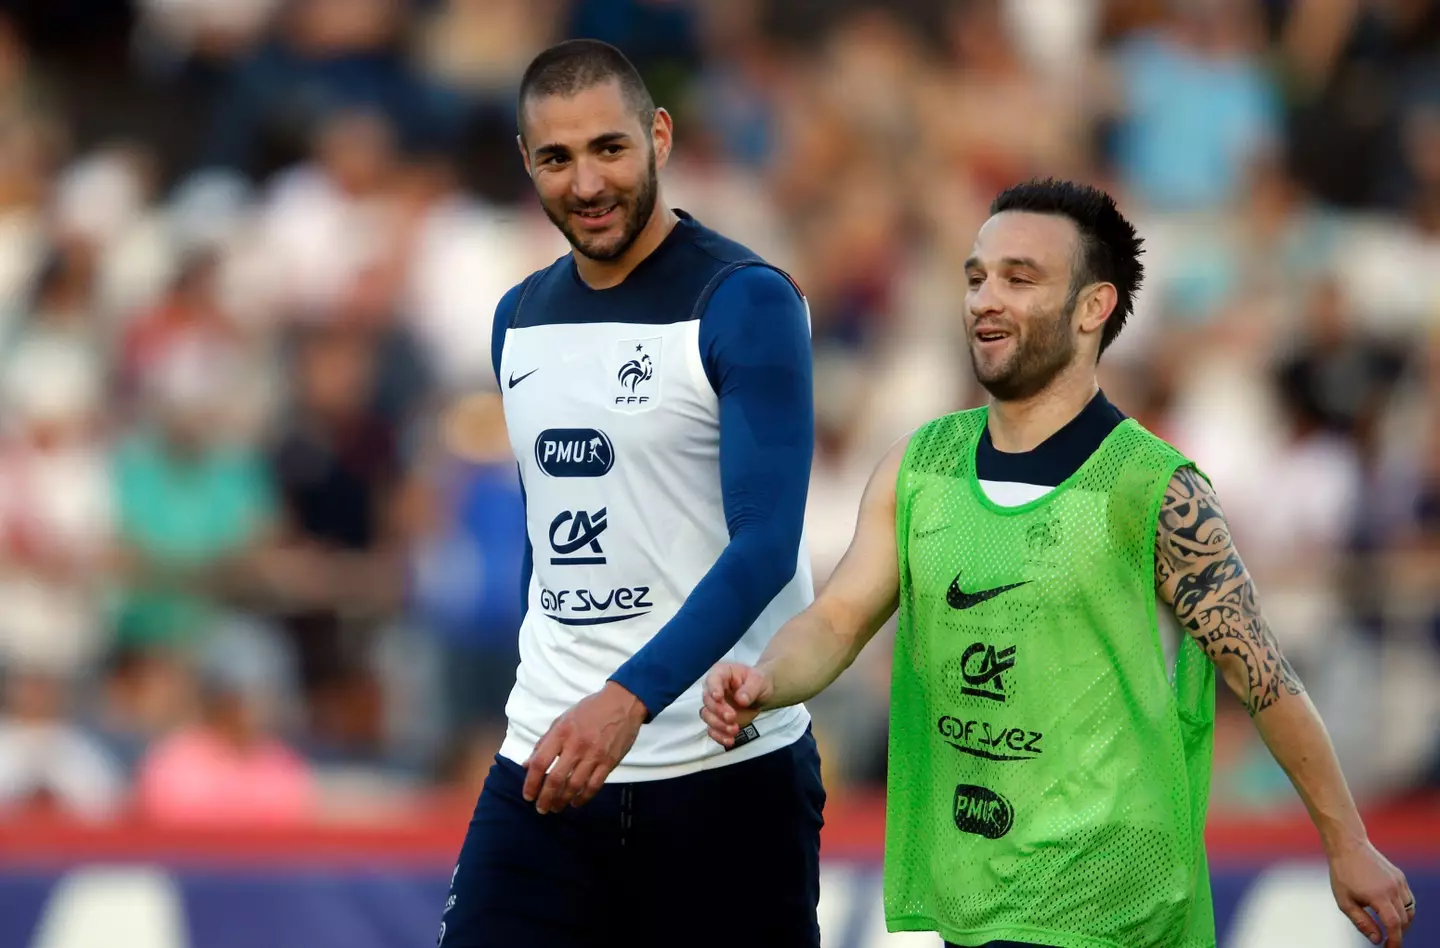 Benzema was found guilty of conspiring to blackmail his former teammate Valbuena (Image: PA)